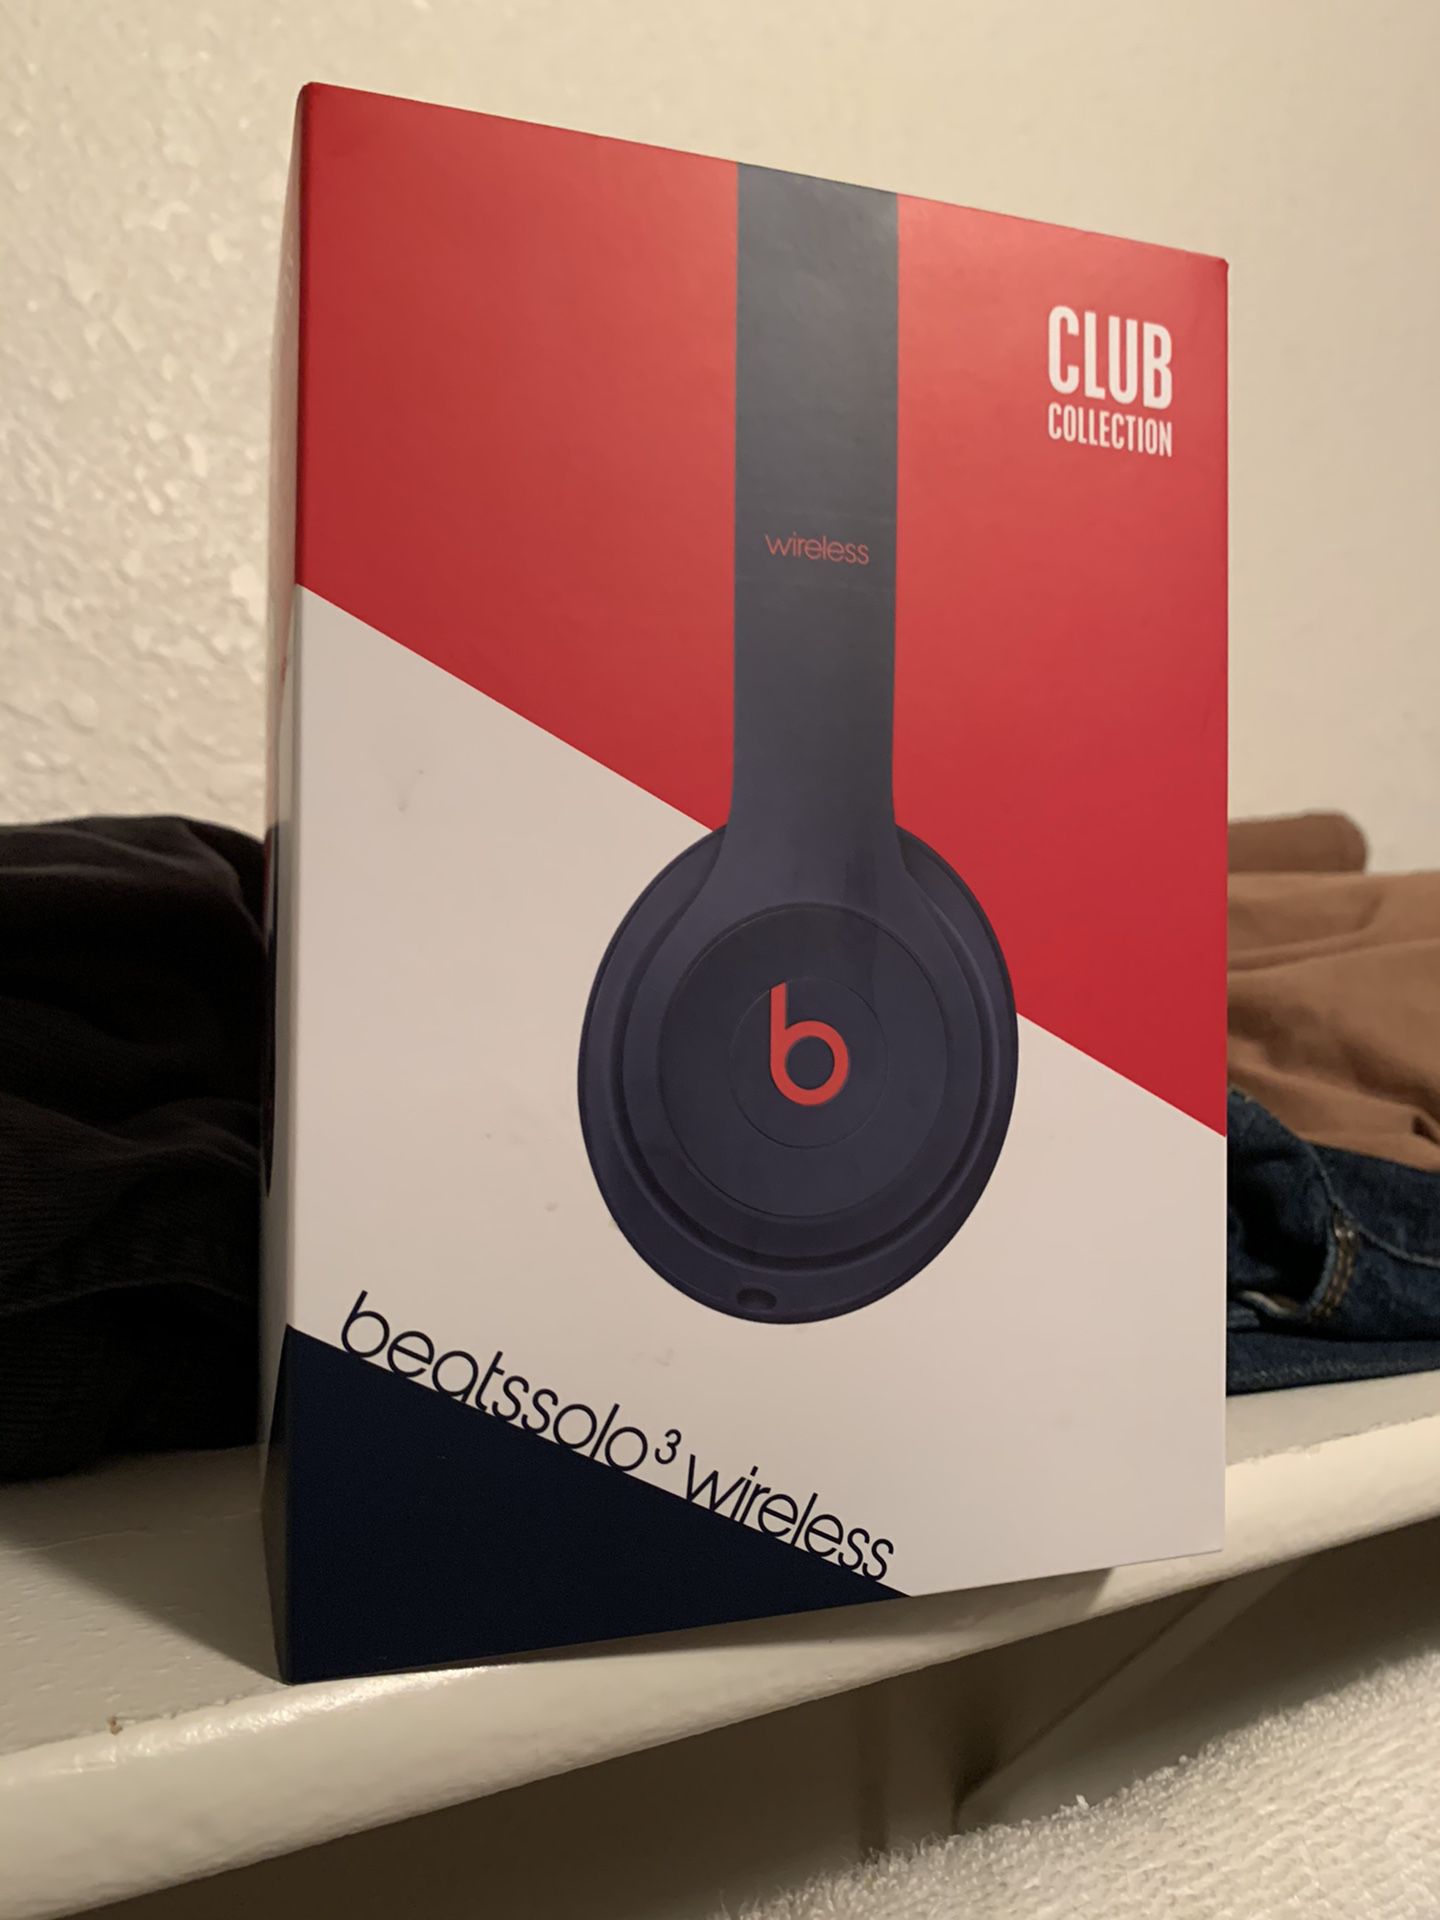 BEATS-SOLO 3 WIRELESS “Club Collection”